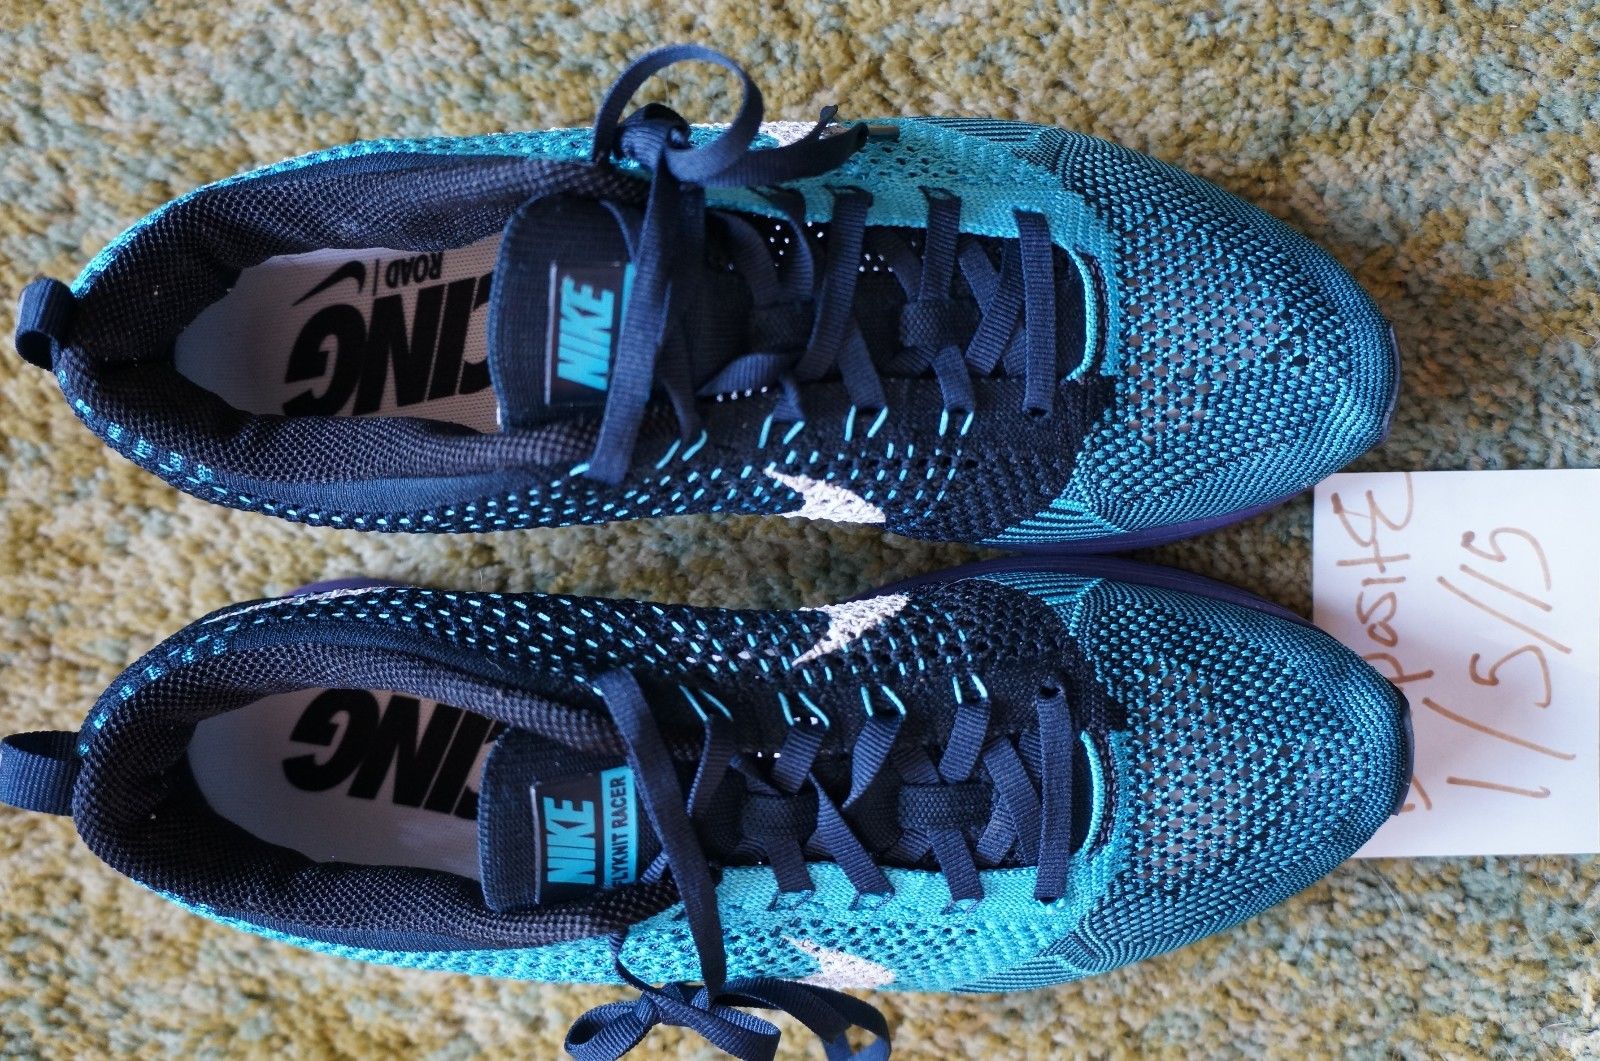 Nike Flyknit Racers with a Zoom Streak 5 Outsole | Sole Collector